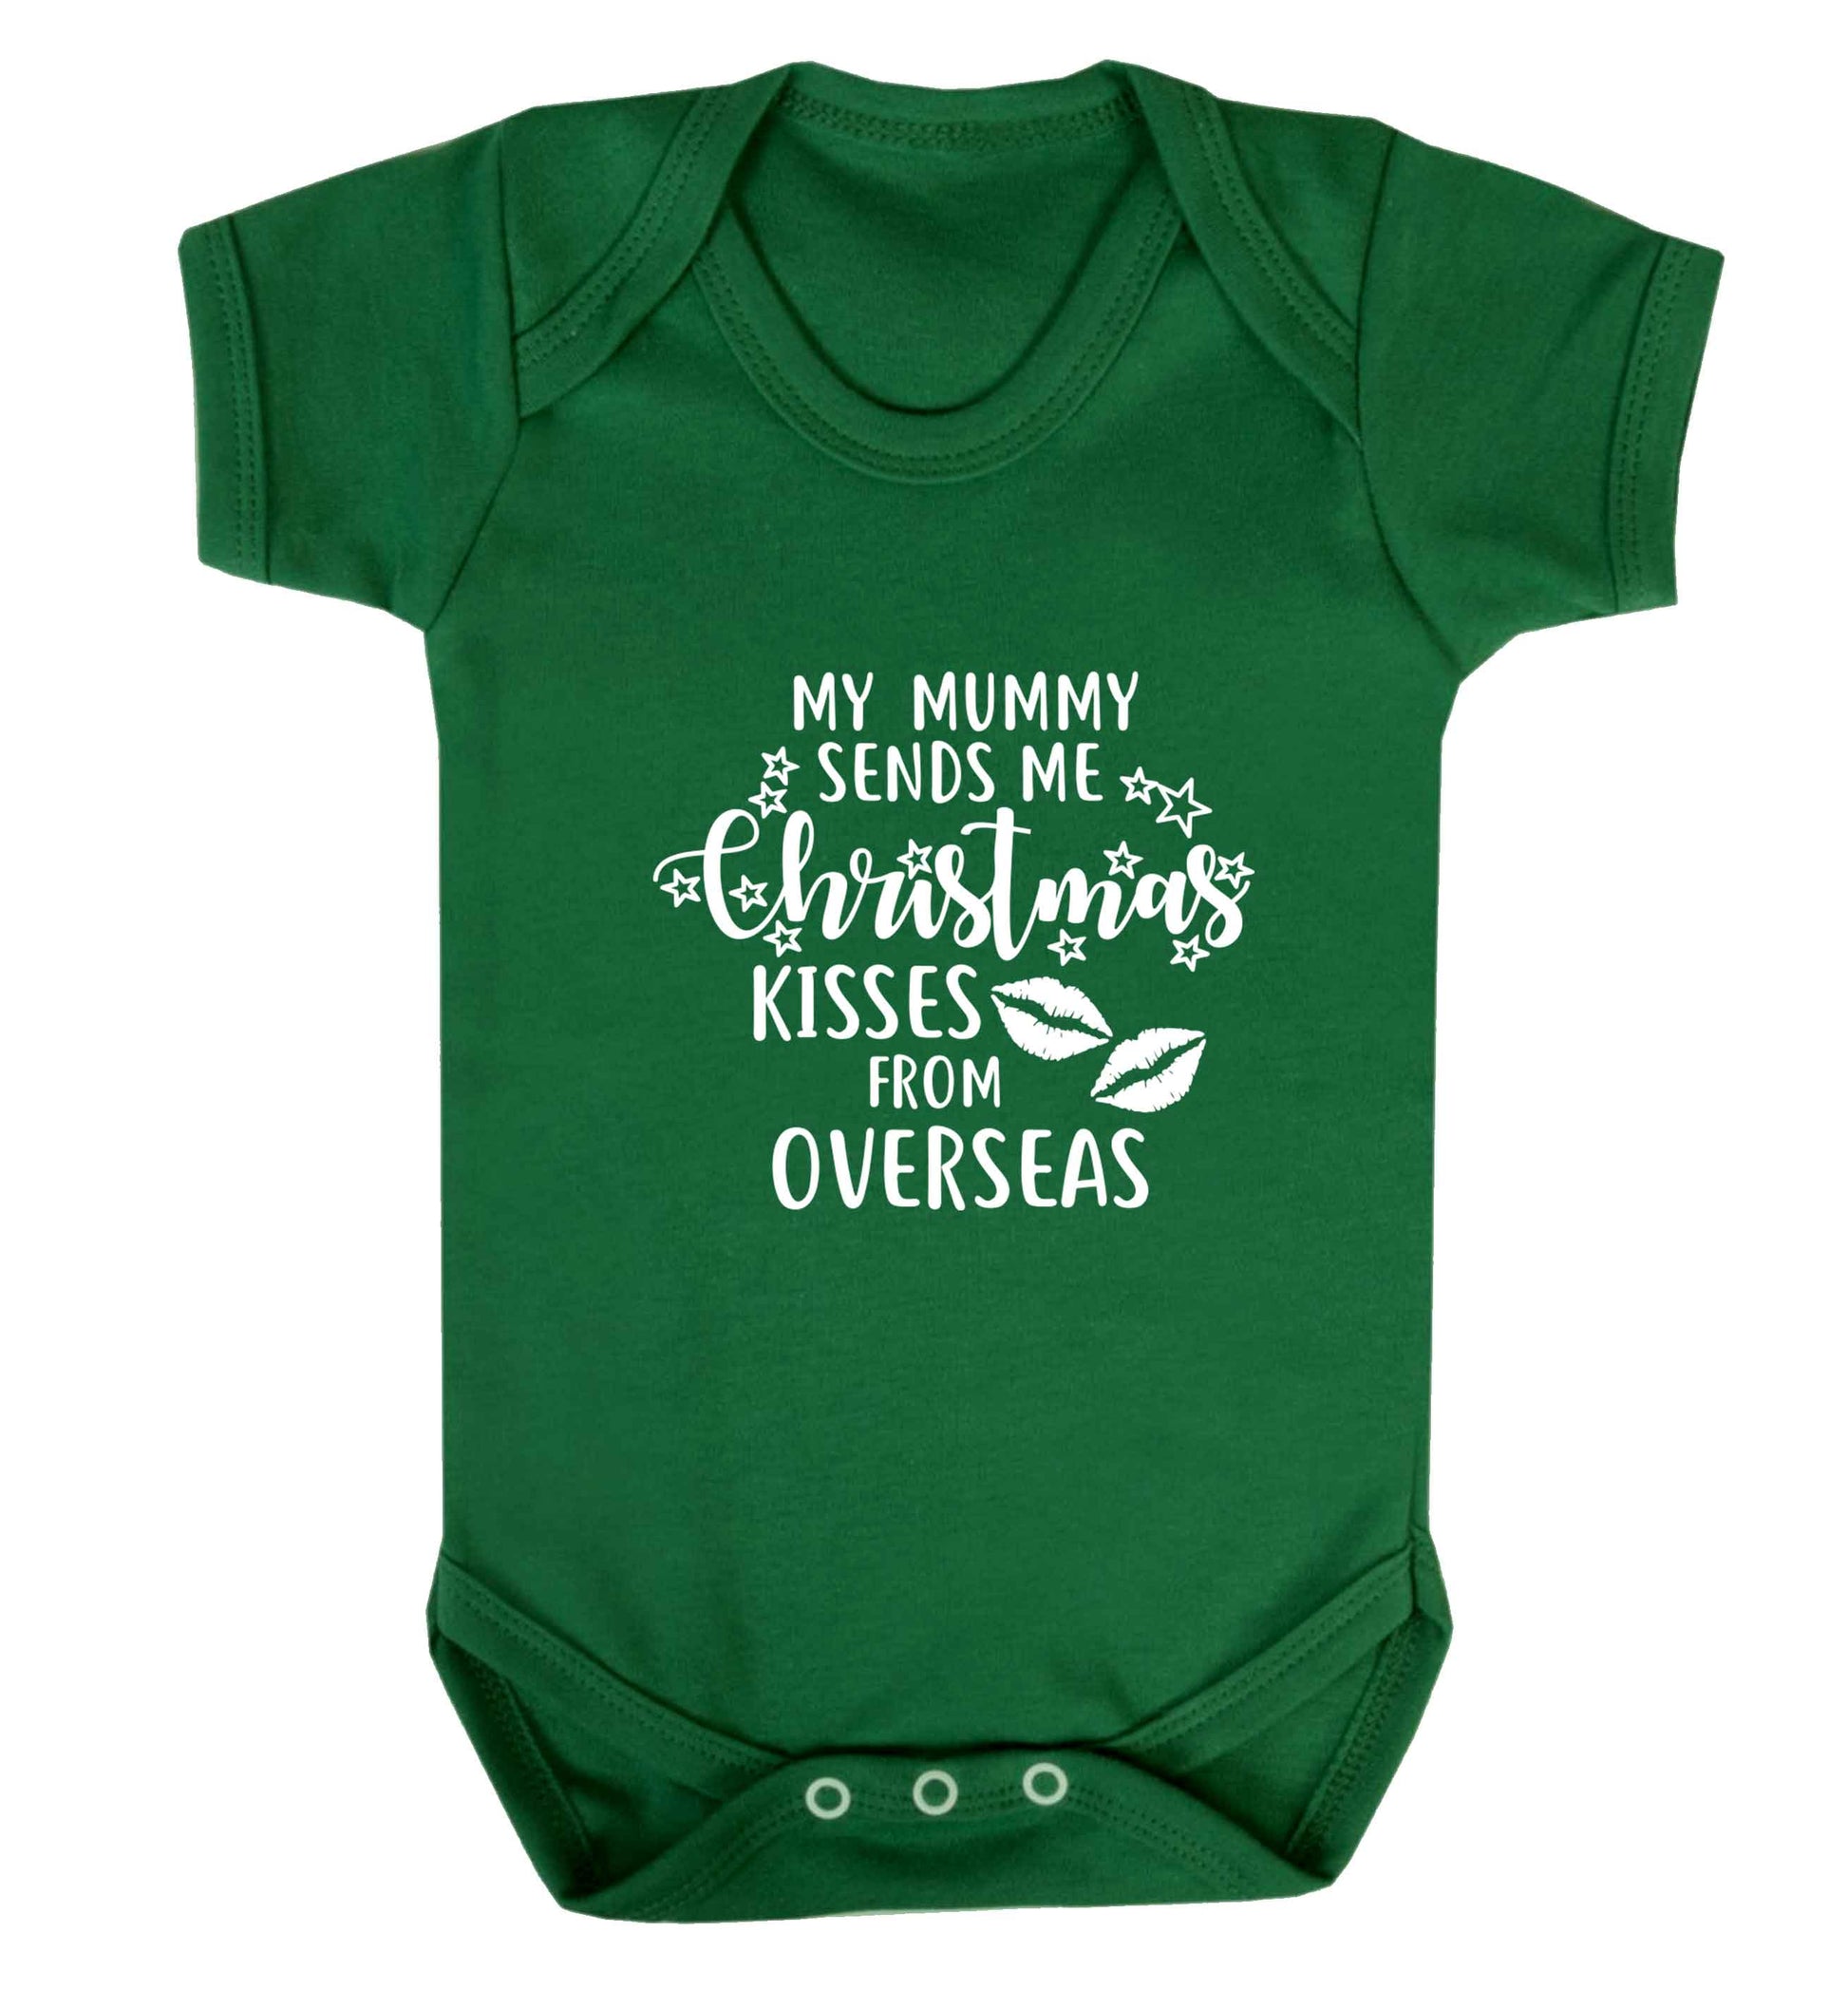 Mummy Christmas Kisses Overseas baby vest green 18-24 months